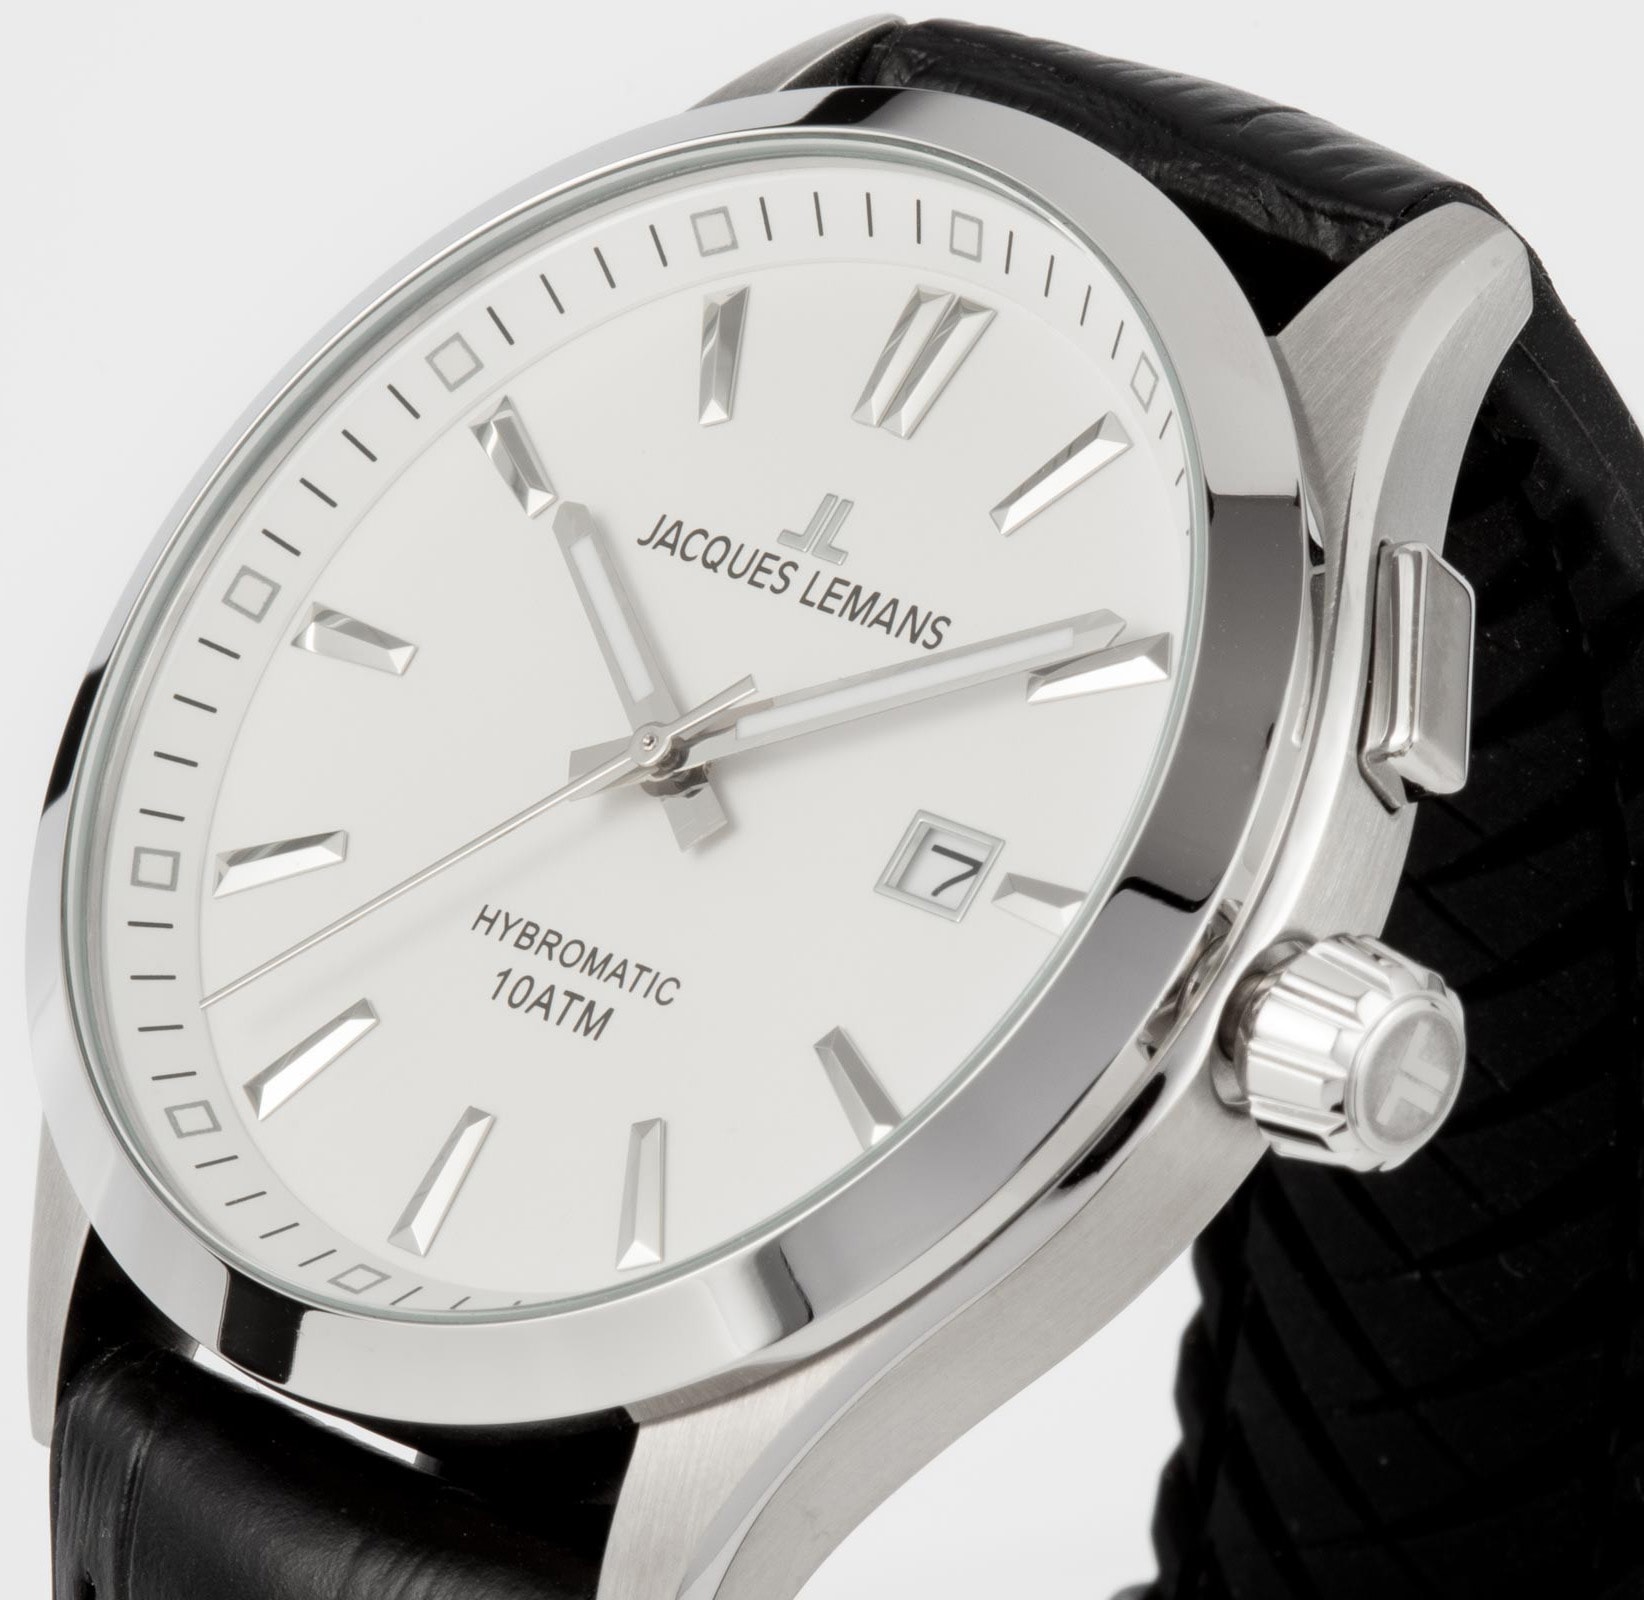 Jacques Lemans 1-2130B« Kineticuhr bei »Hybromatic